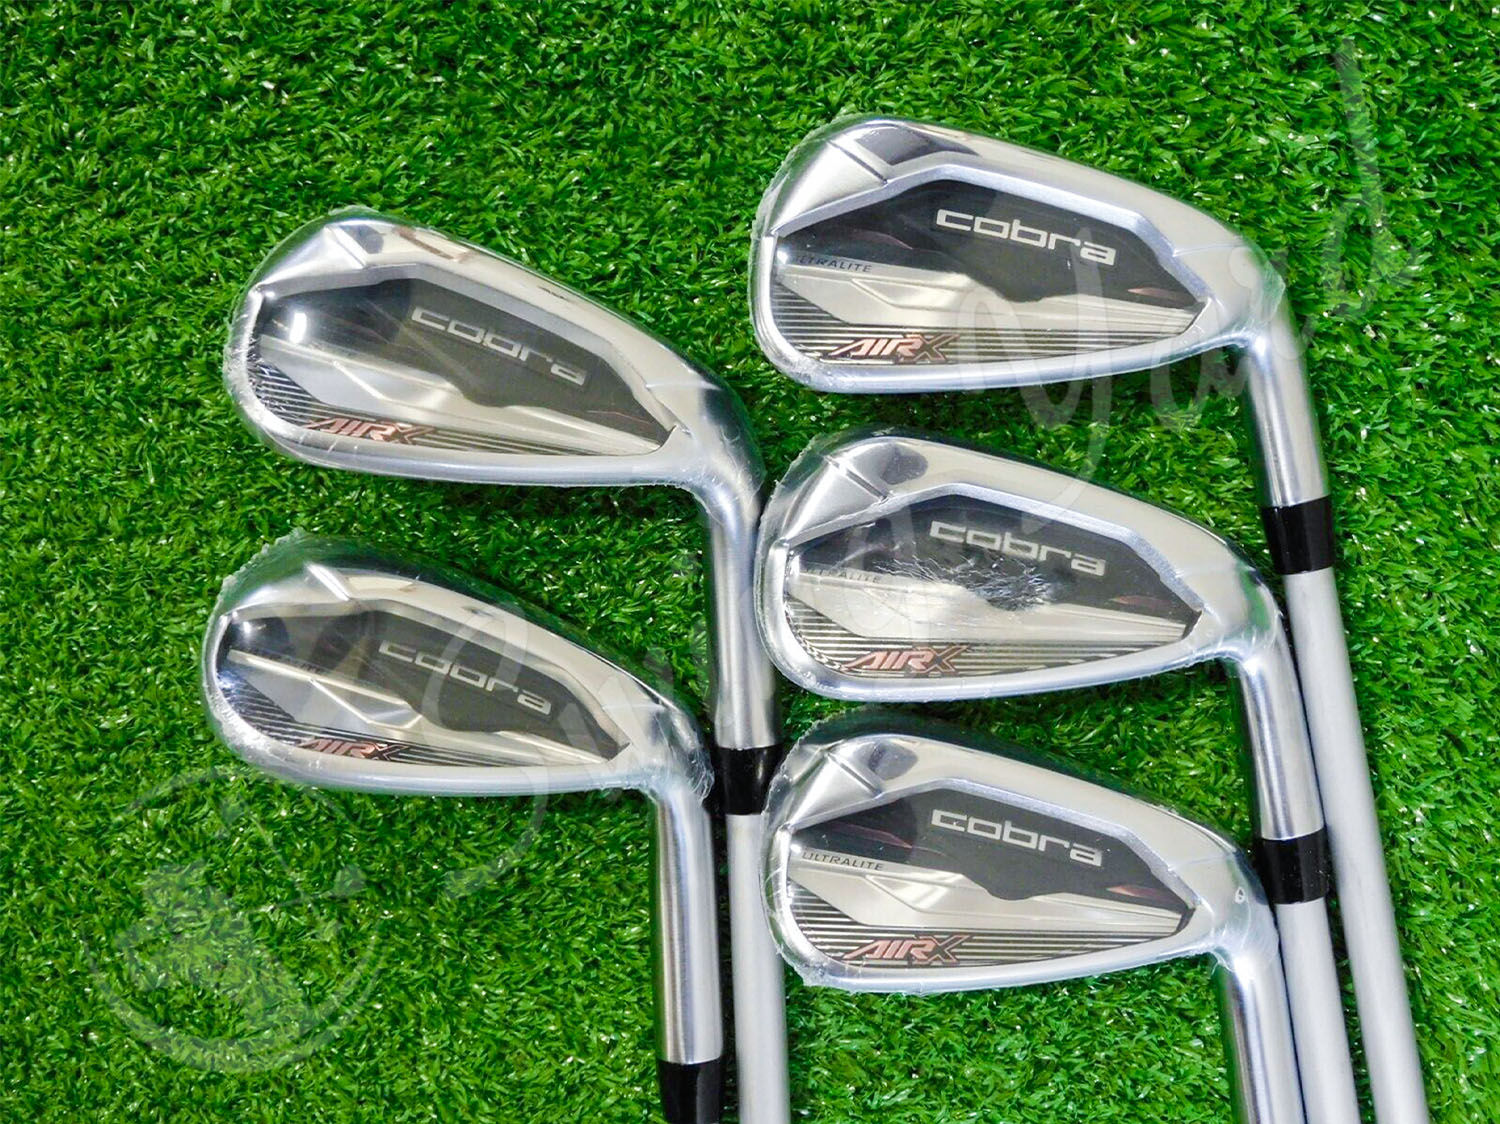 My new Cobra Air X Iron clubs for testing